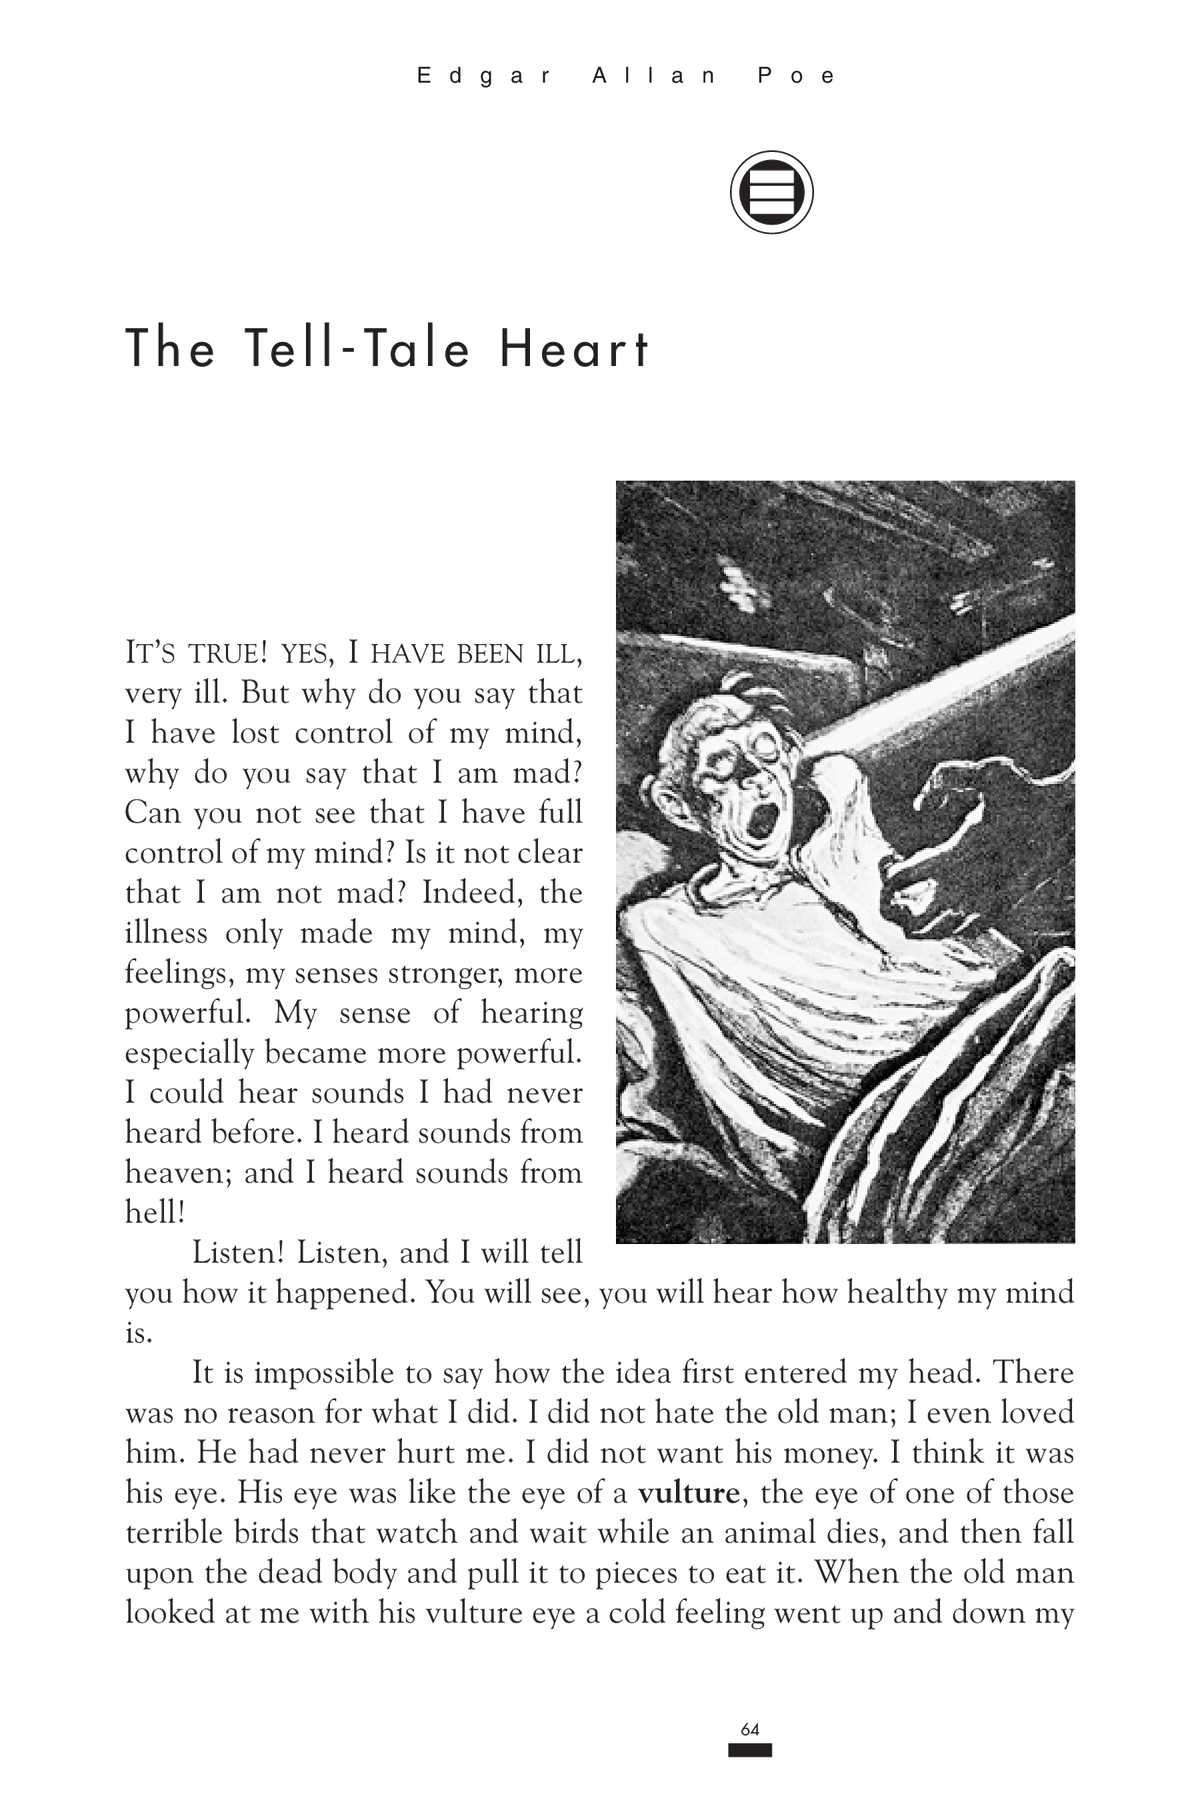 The Tell Tale Heart Story